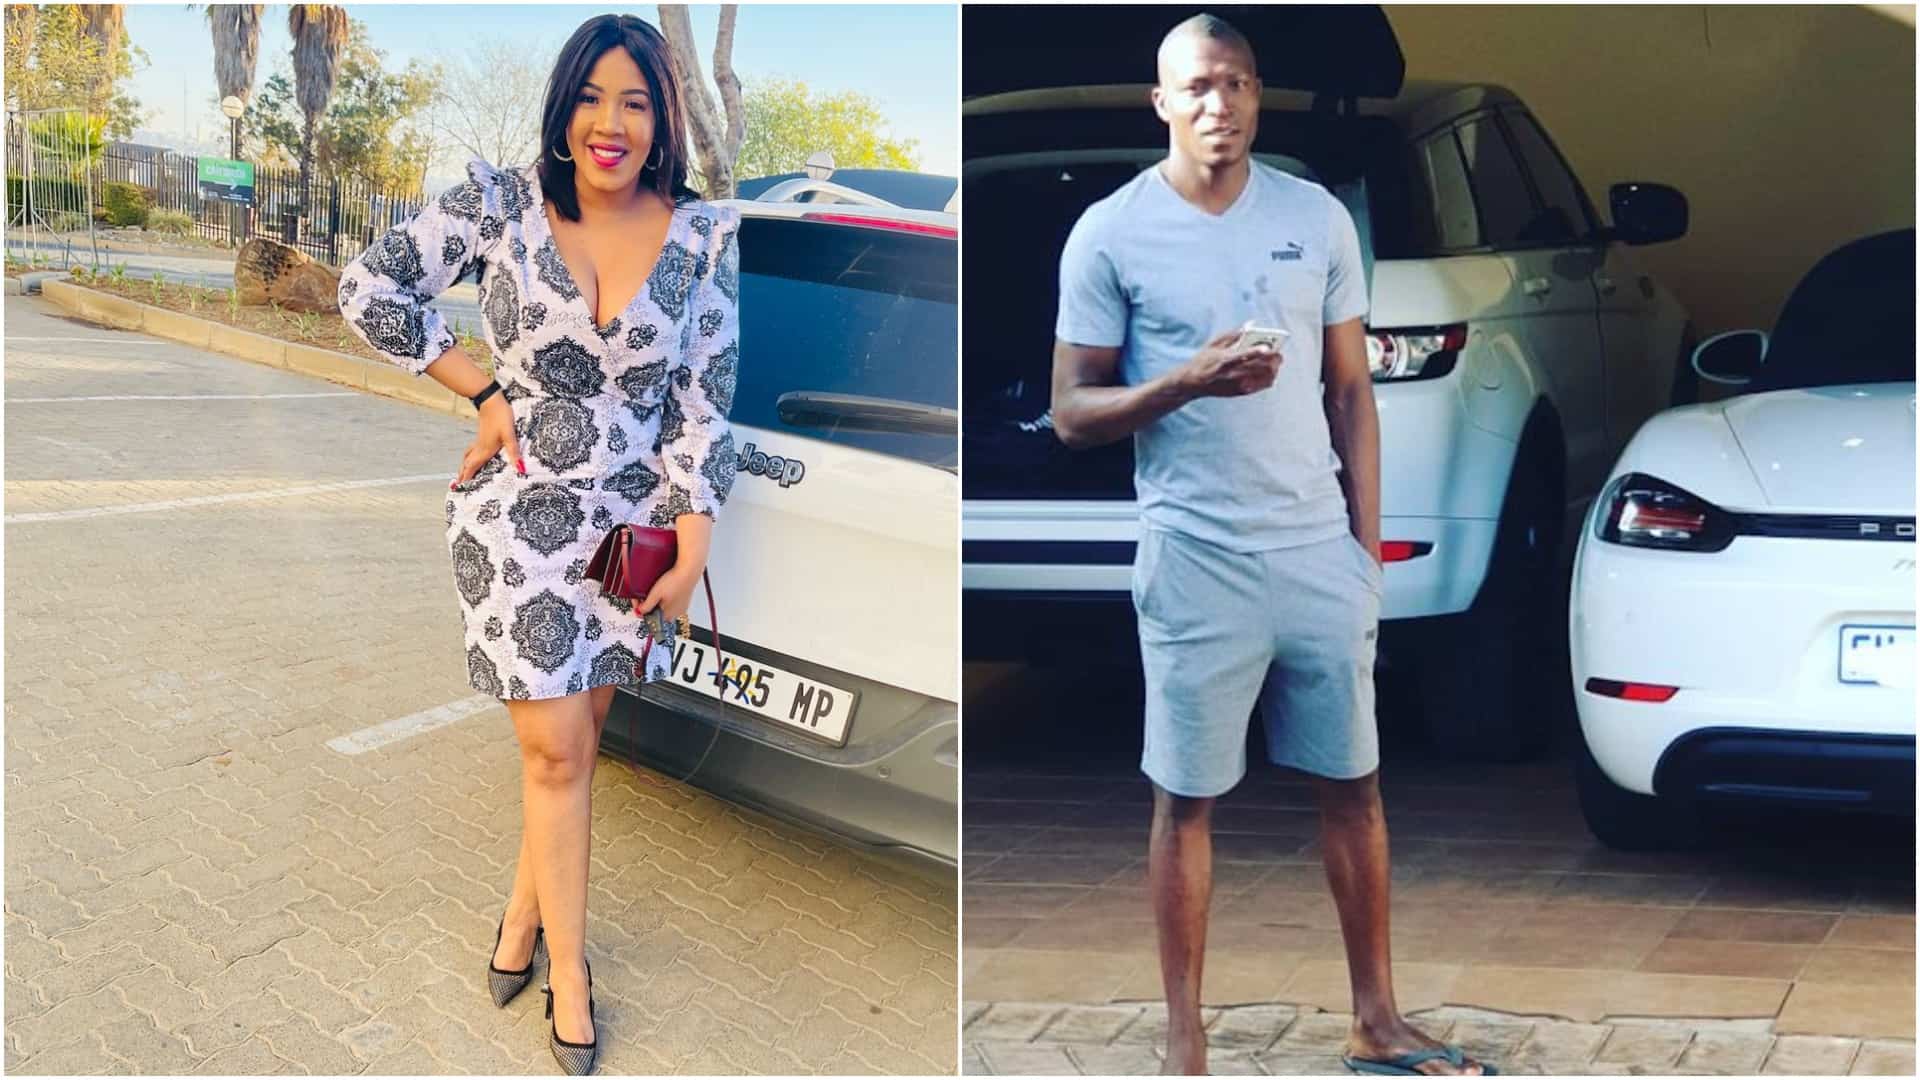 Tendai Ndoro finally tells his story, clears ex-wife of any wrongdoing